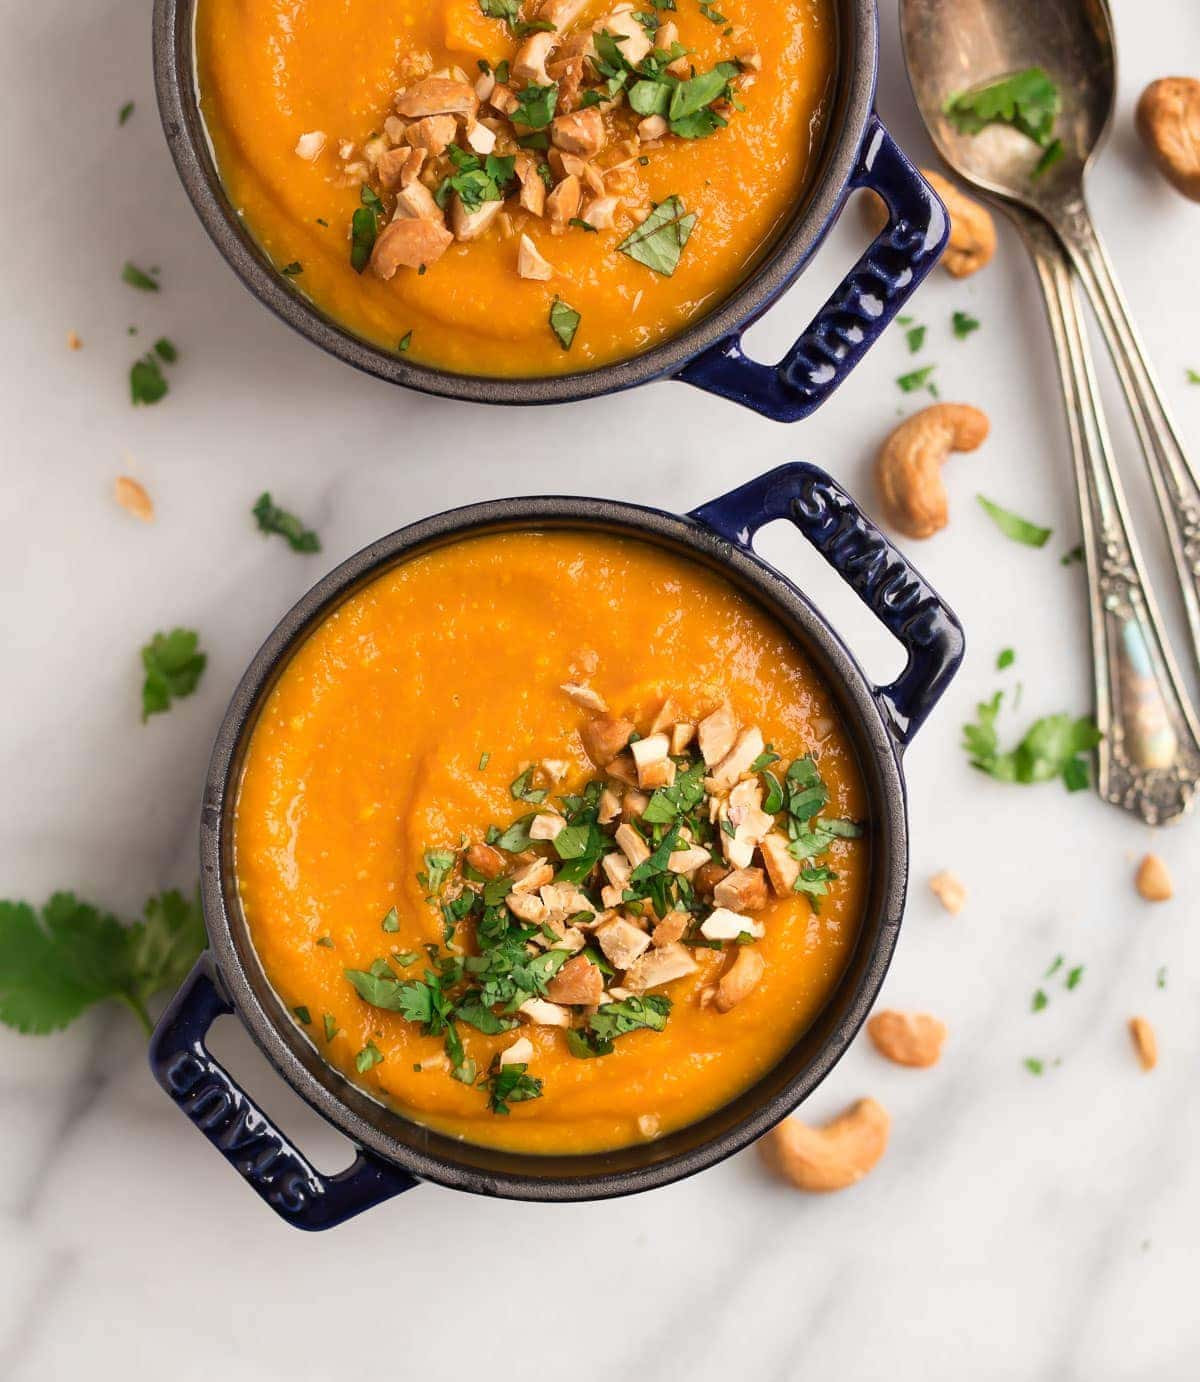 Carrot soup Instant Pot Inspirational Instant Pot Carrot soup with Ginger